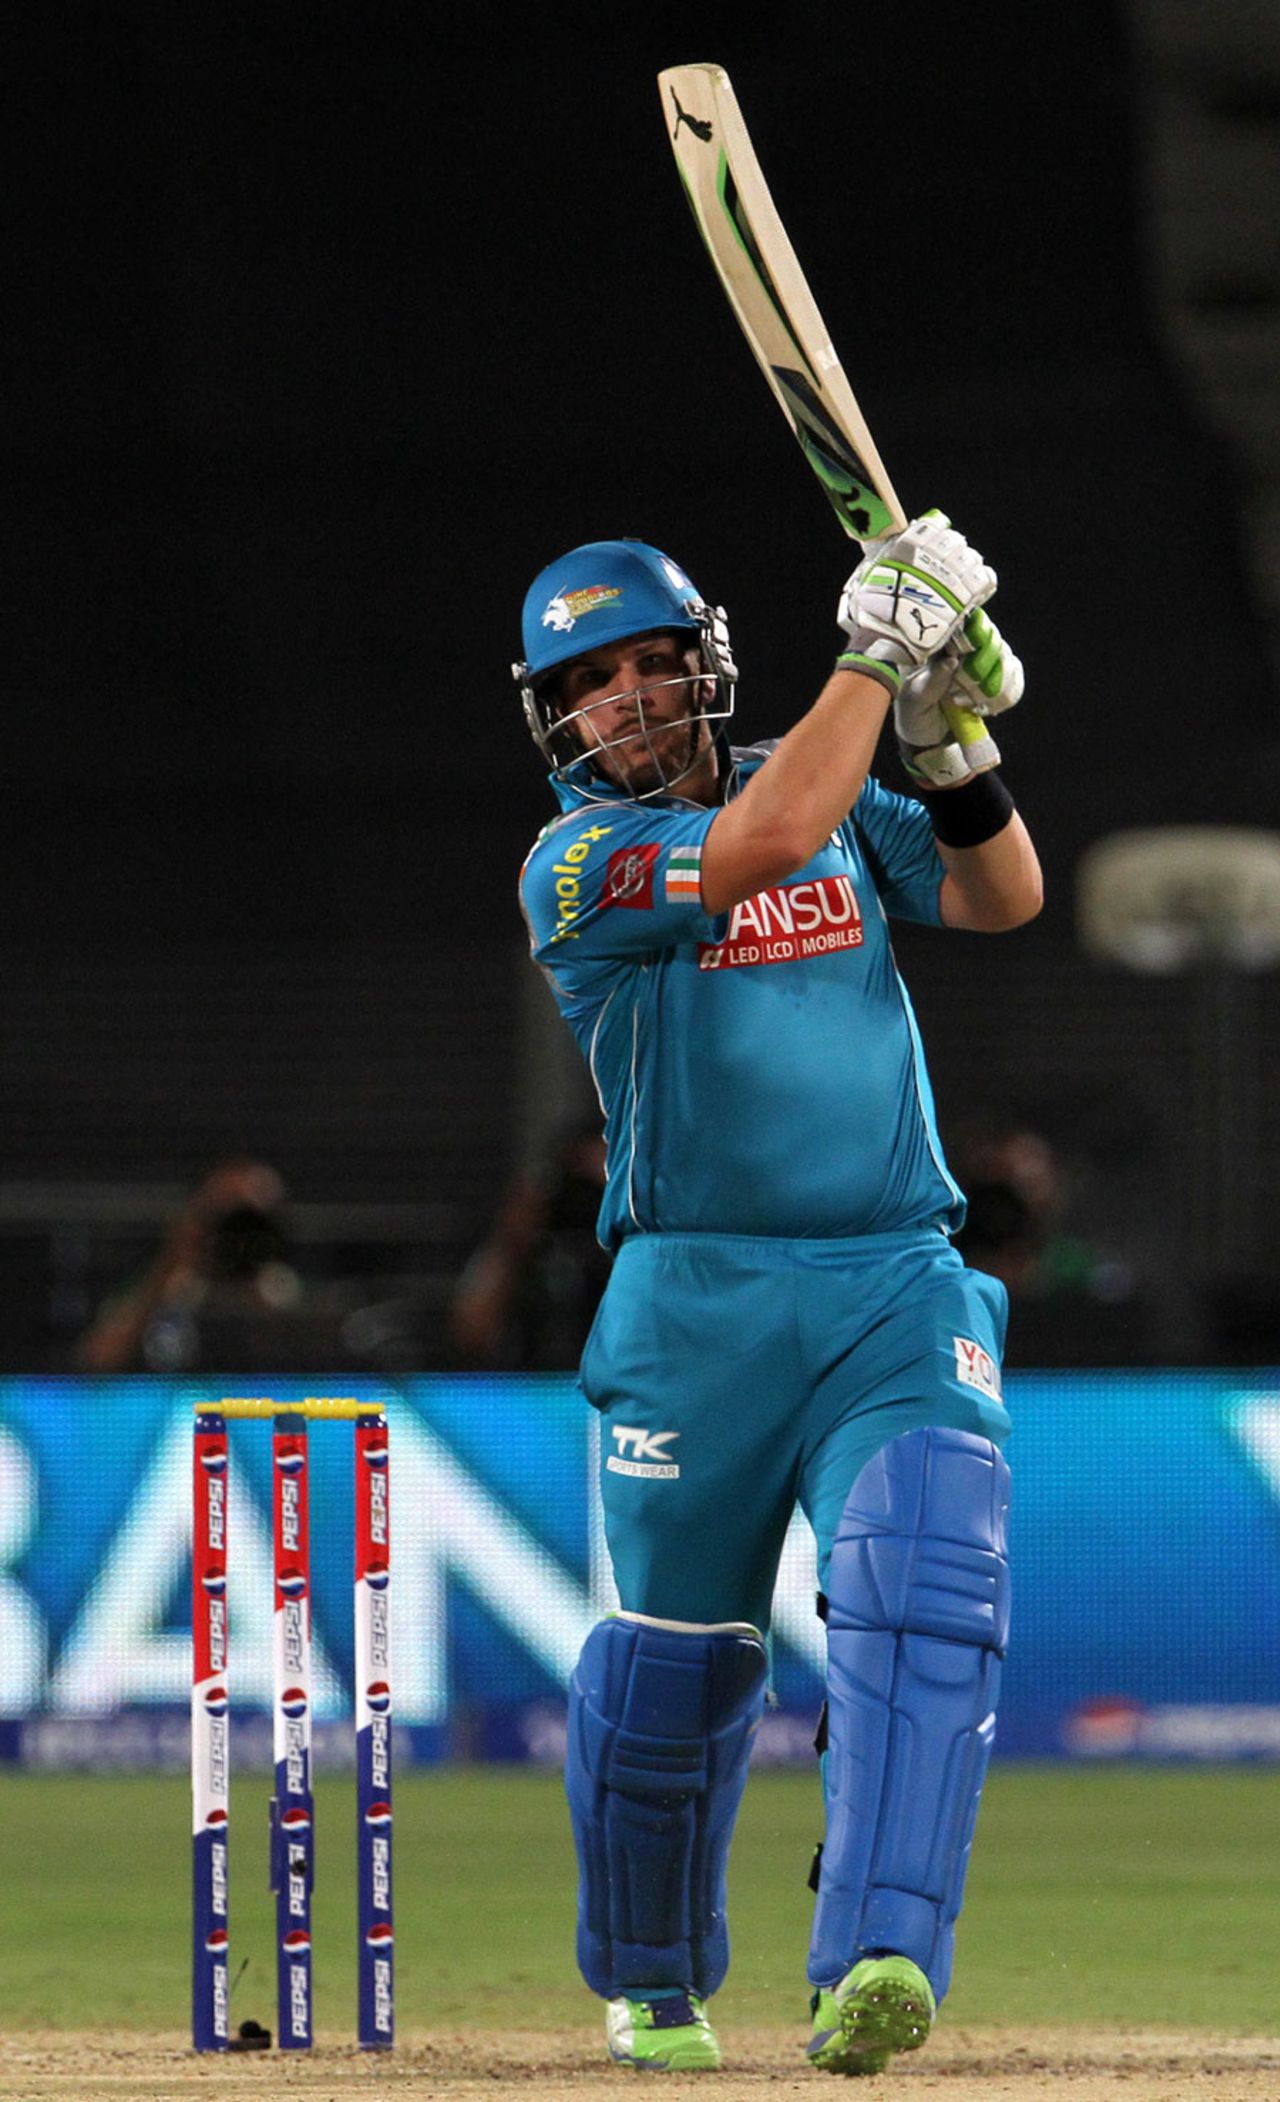 Aaron Finch blasts down the ground, Pune Warriors v Chennai Super Kings, IPL, Pune, April 30, 2013